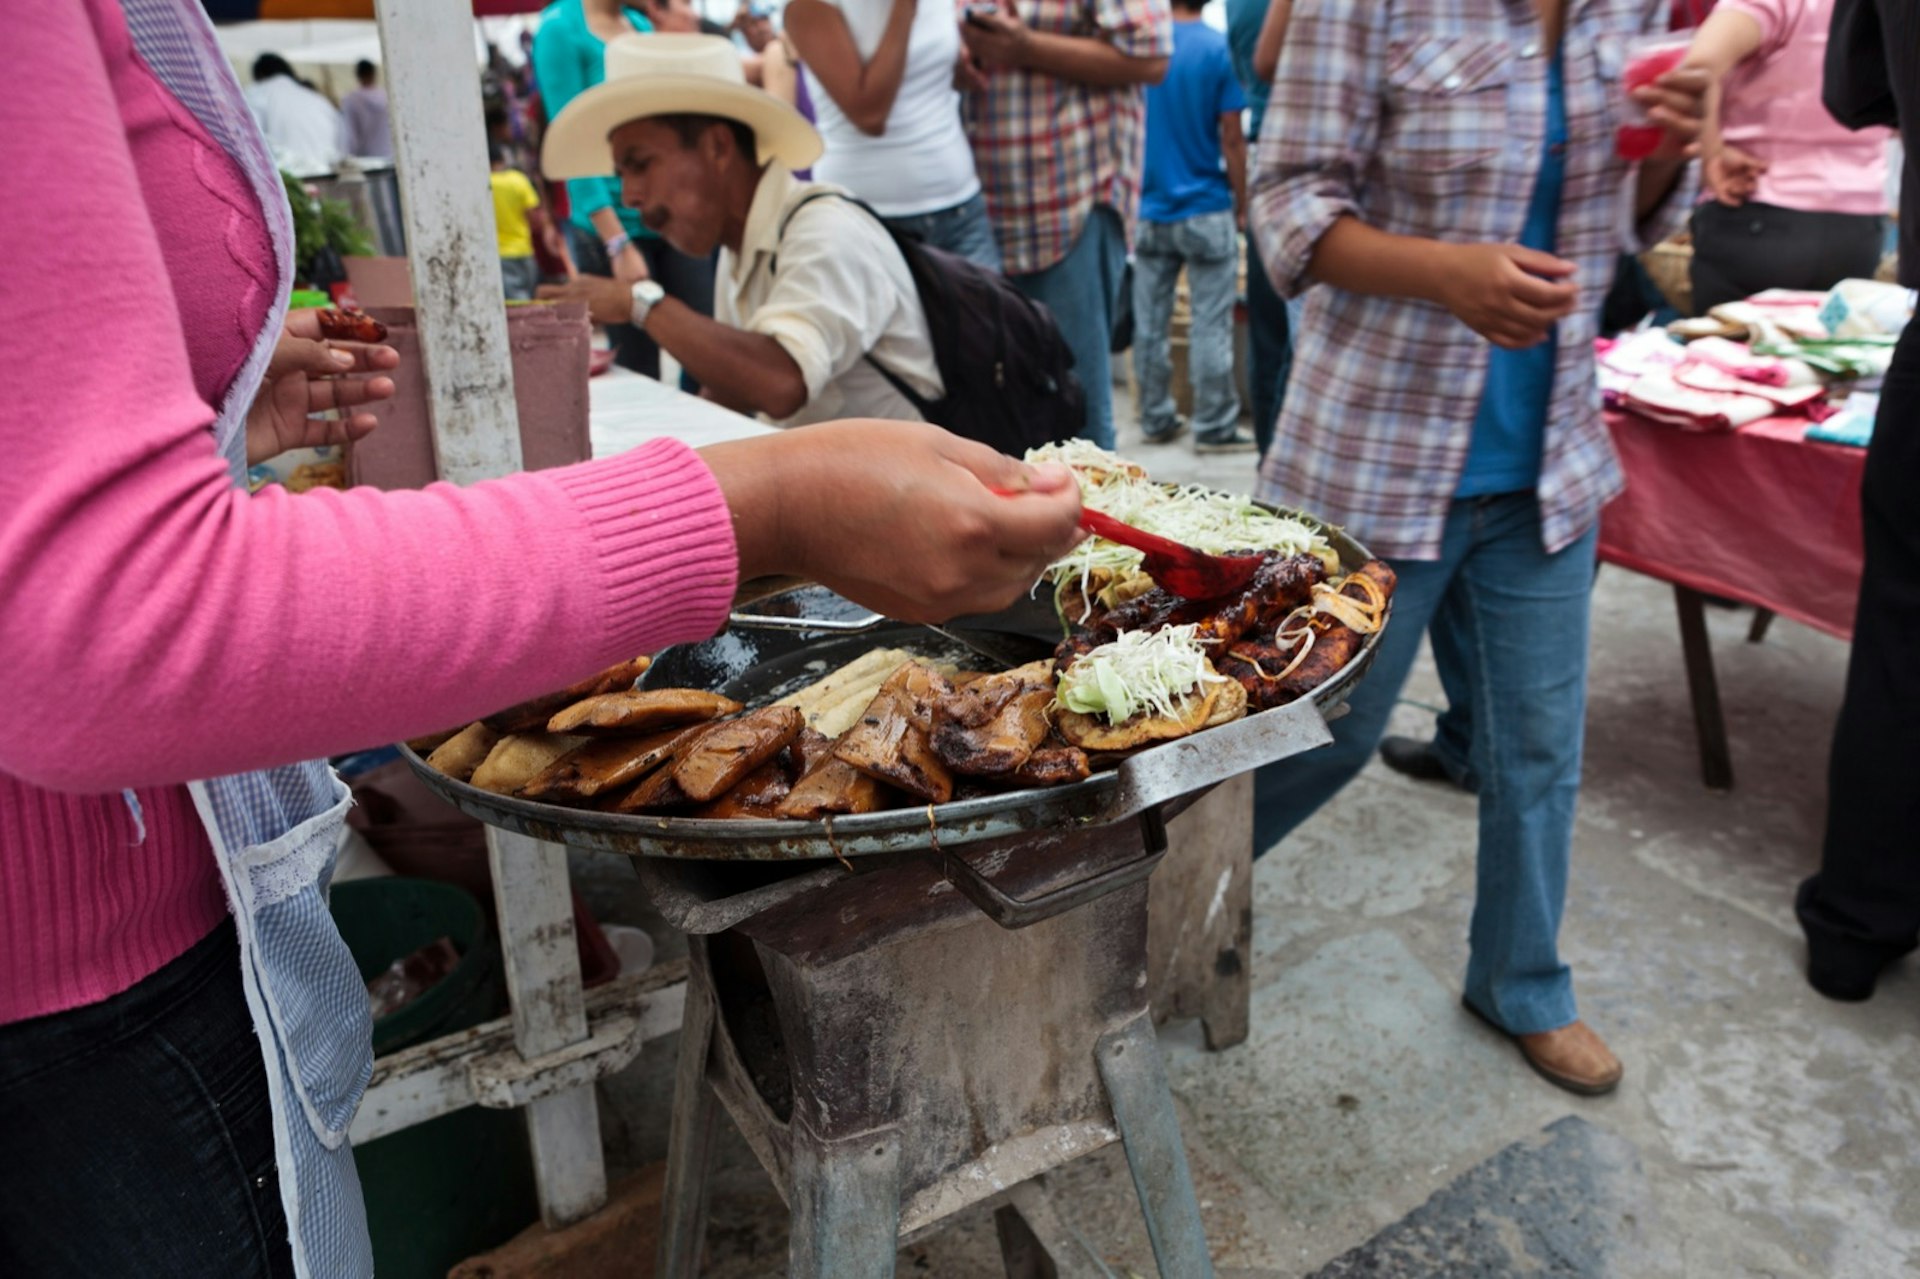 A woman ladles mole sauce over a plate of enchiladas from a street stall while lots of people walk past